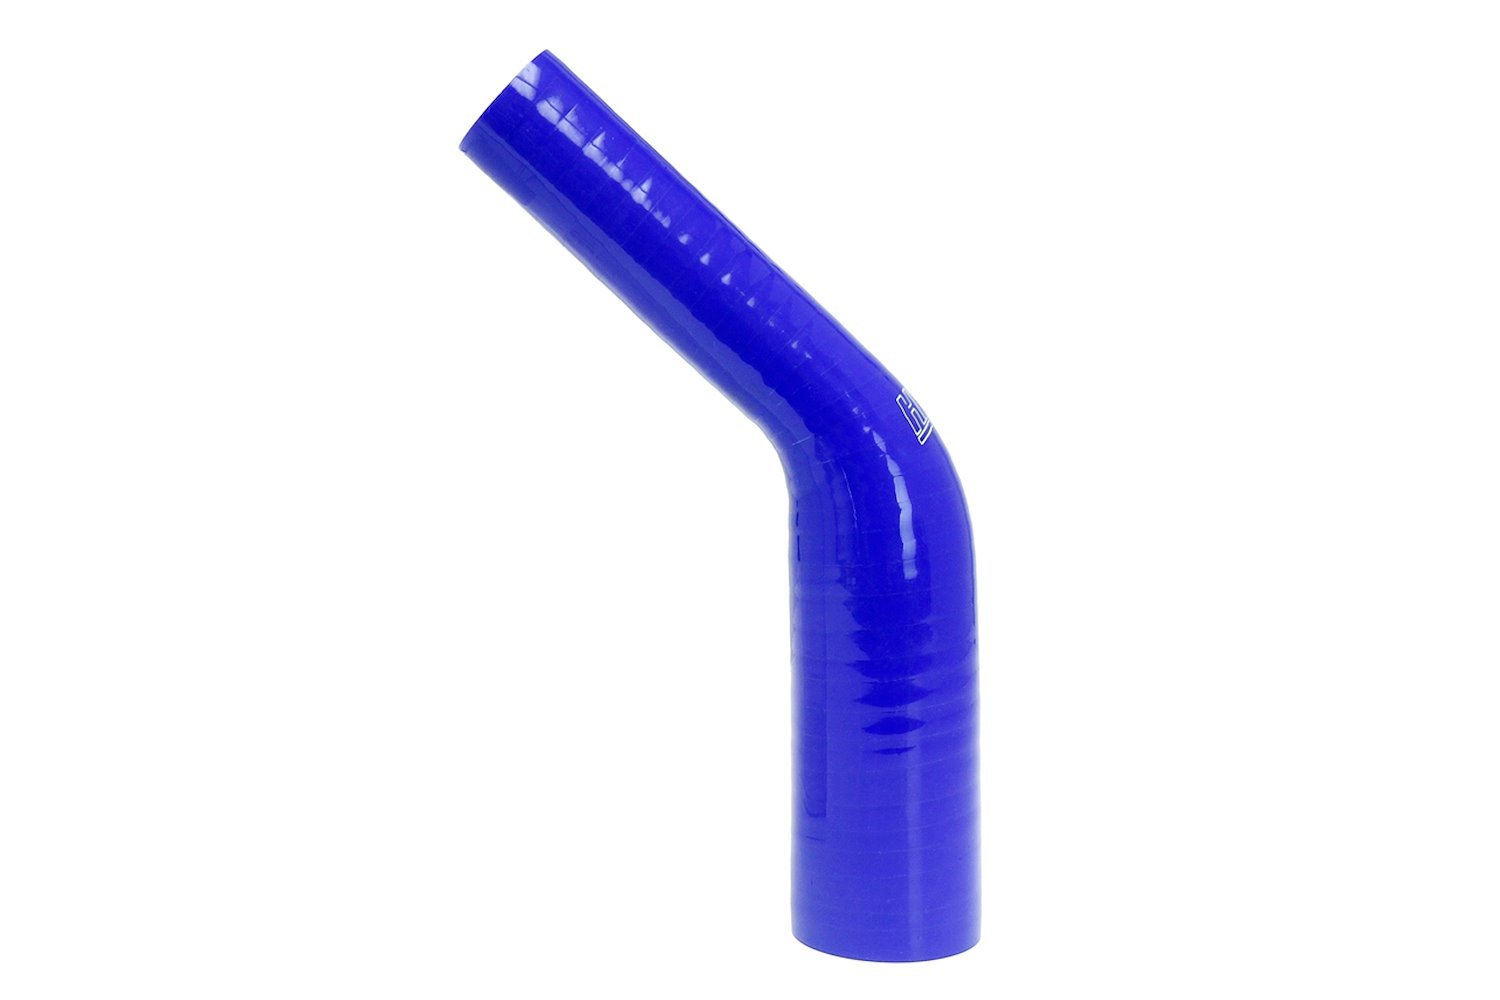 HTSER45-125-138-BLUE Silicone 45-Degree Elbow Hose, High-Temp 4-Ply Reinforced, 1-1/4 in. - 1-3/8 in. ID, Blue